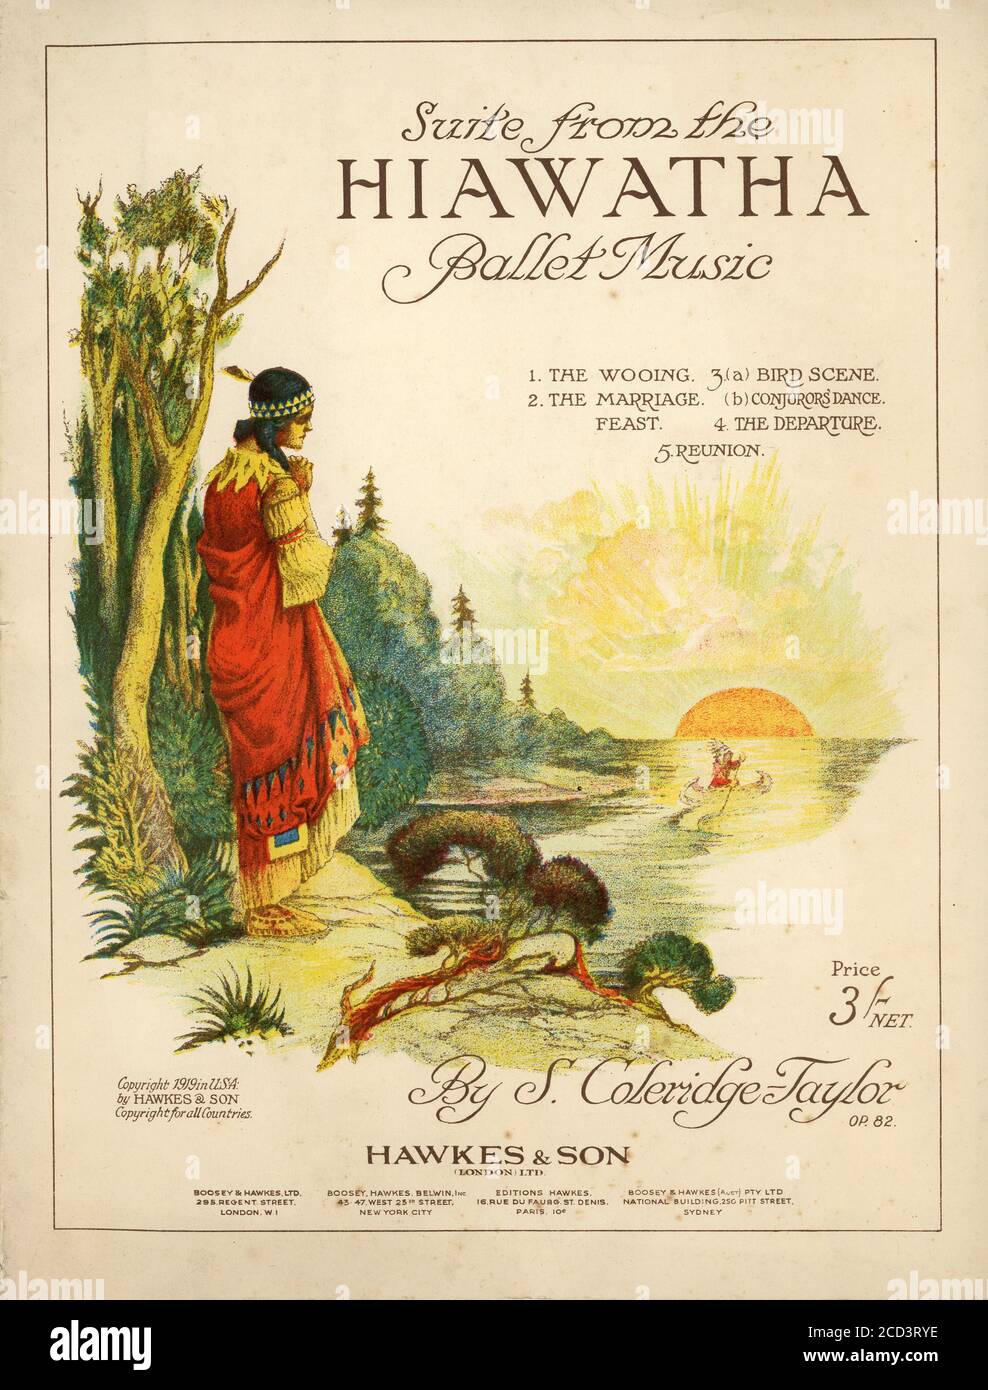 Sheet Music - Suite from Hiawatha Ballet Music by Samuel Coleidge-Taylor - 1919 Stock Photo